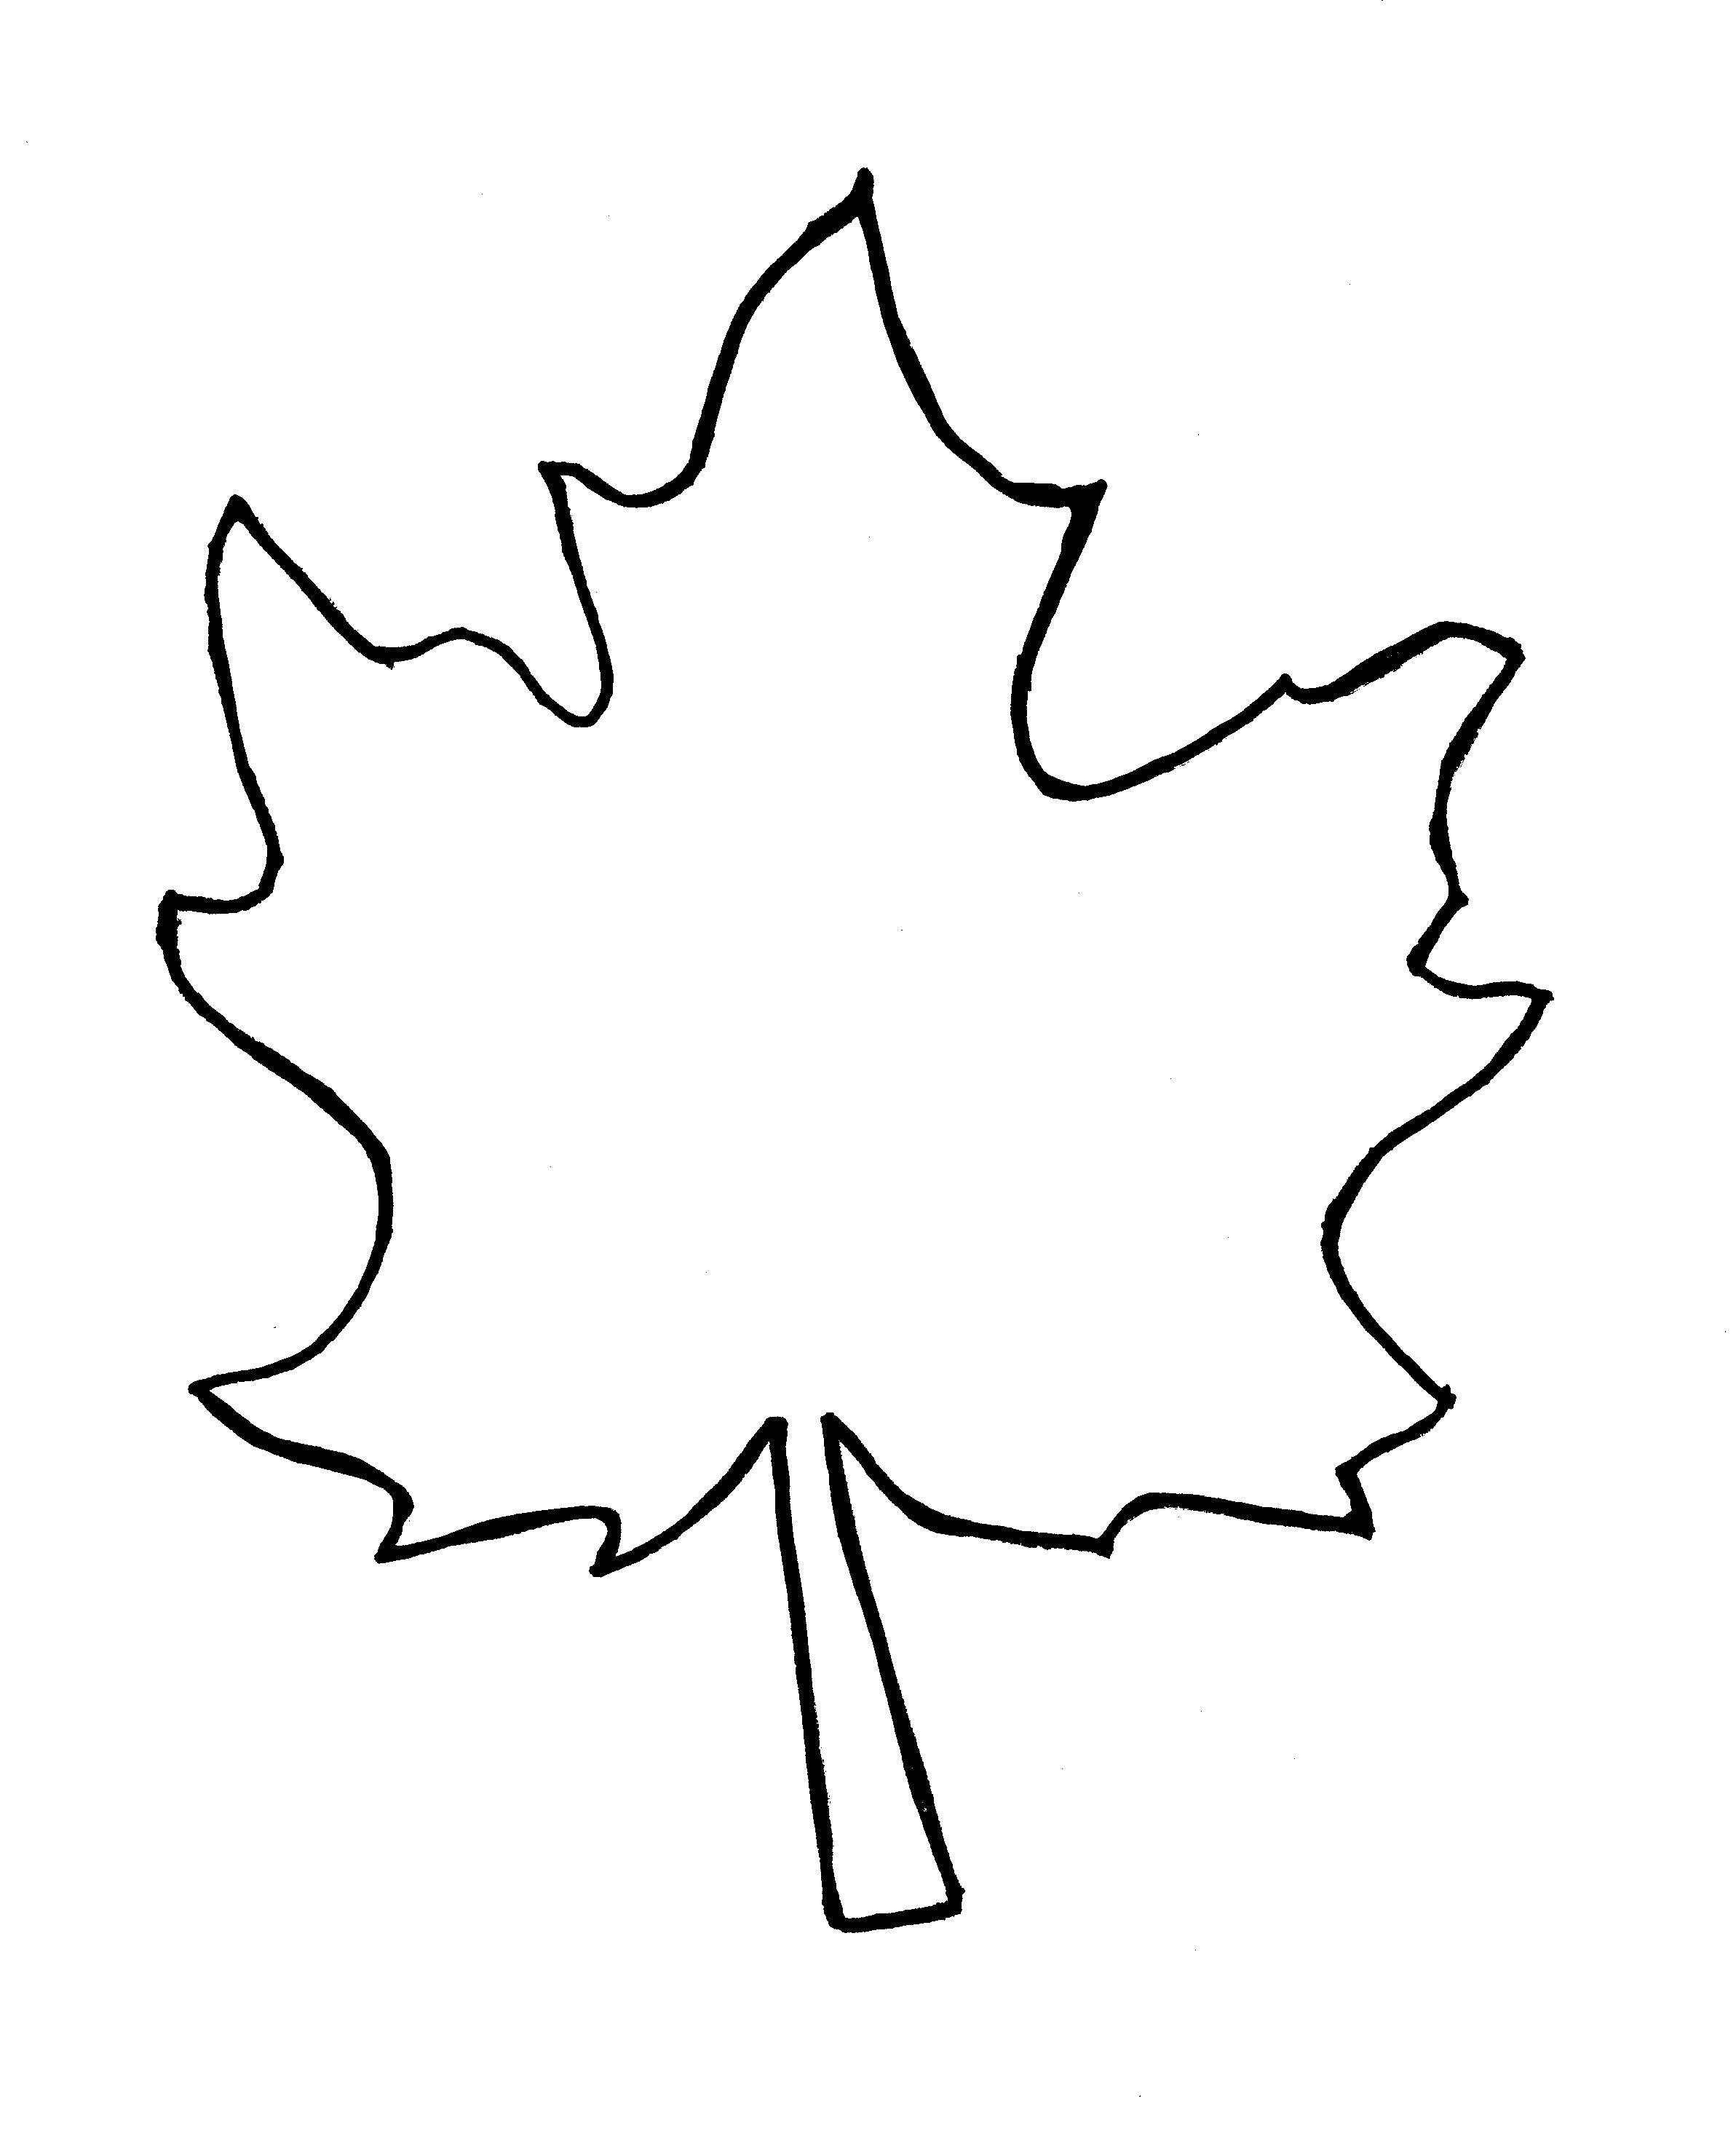 Coloring Maple leaf. Category The contours of the leaves of the trees. Tags:  maple leaf.